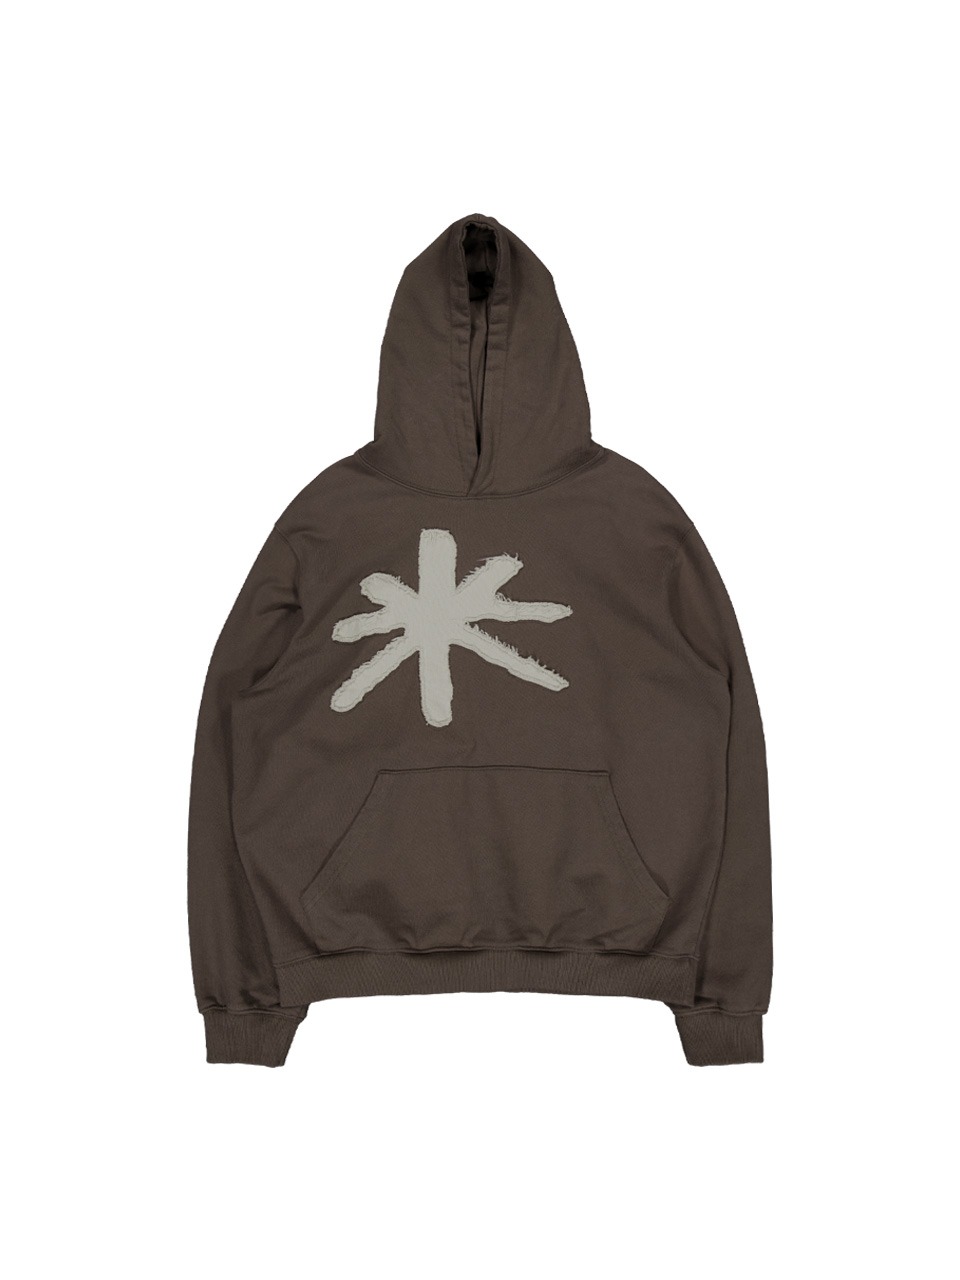 THECOLDESTMOMENT - TCM S FLOWER HOODIE (DARK BROWN)